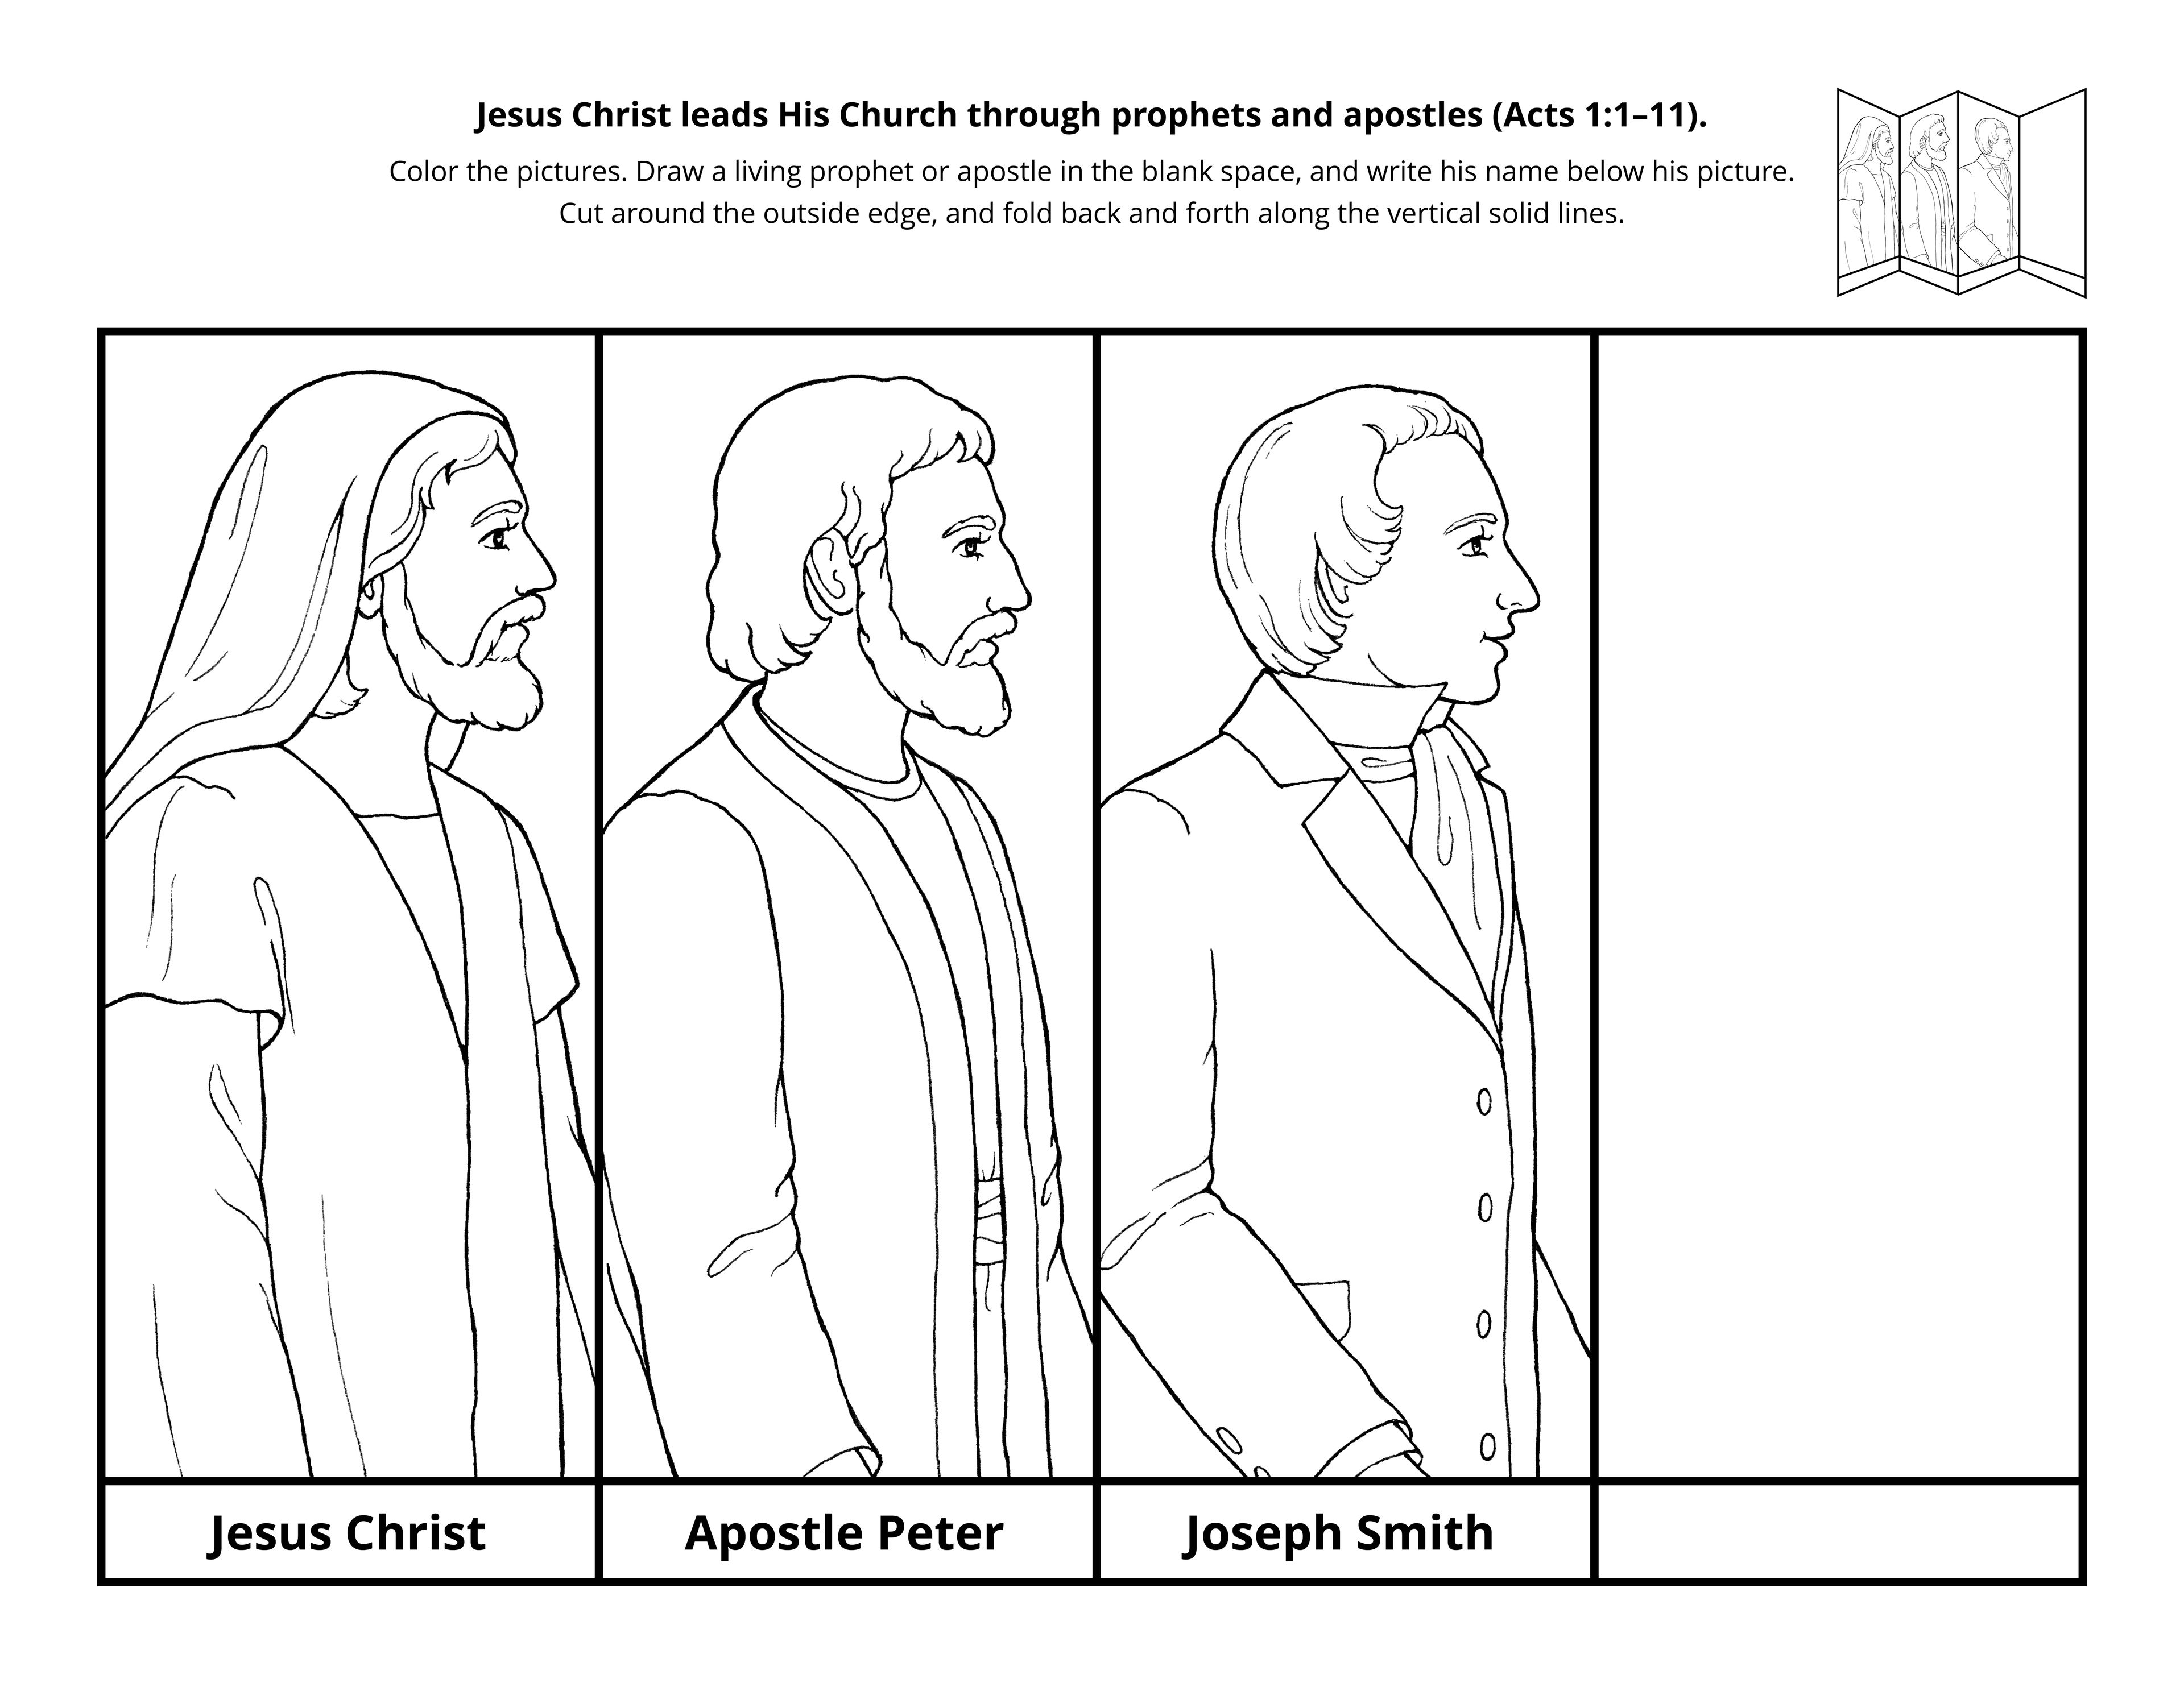 Jesus Christ leads His Church through prophets and apostles.